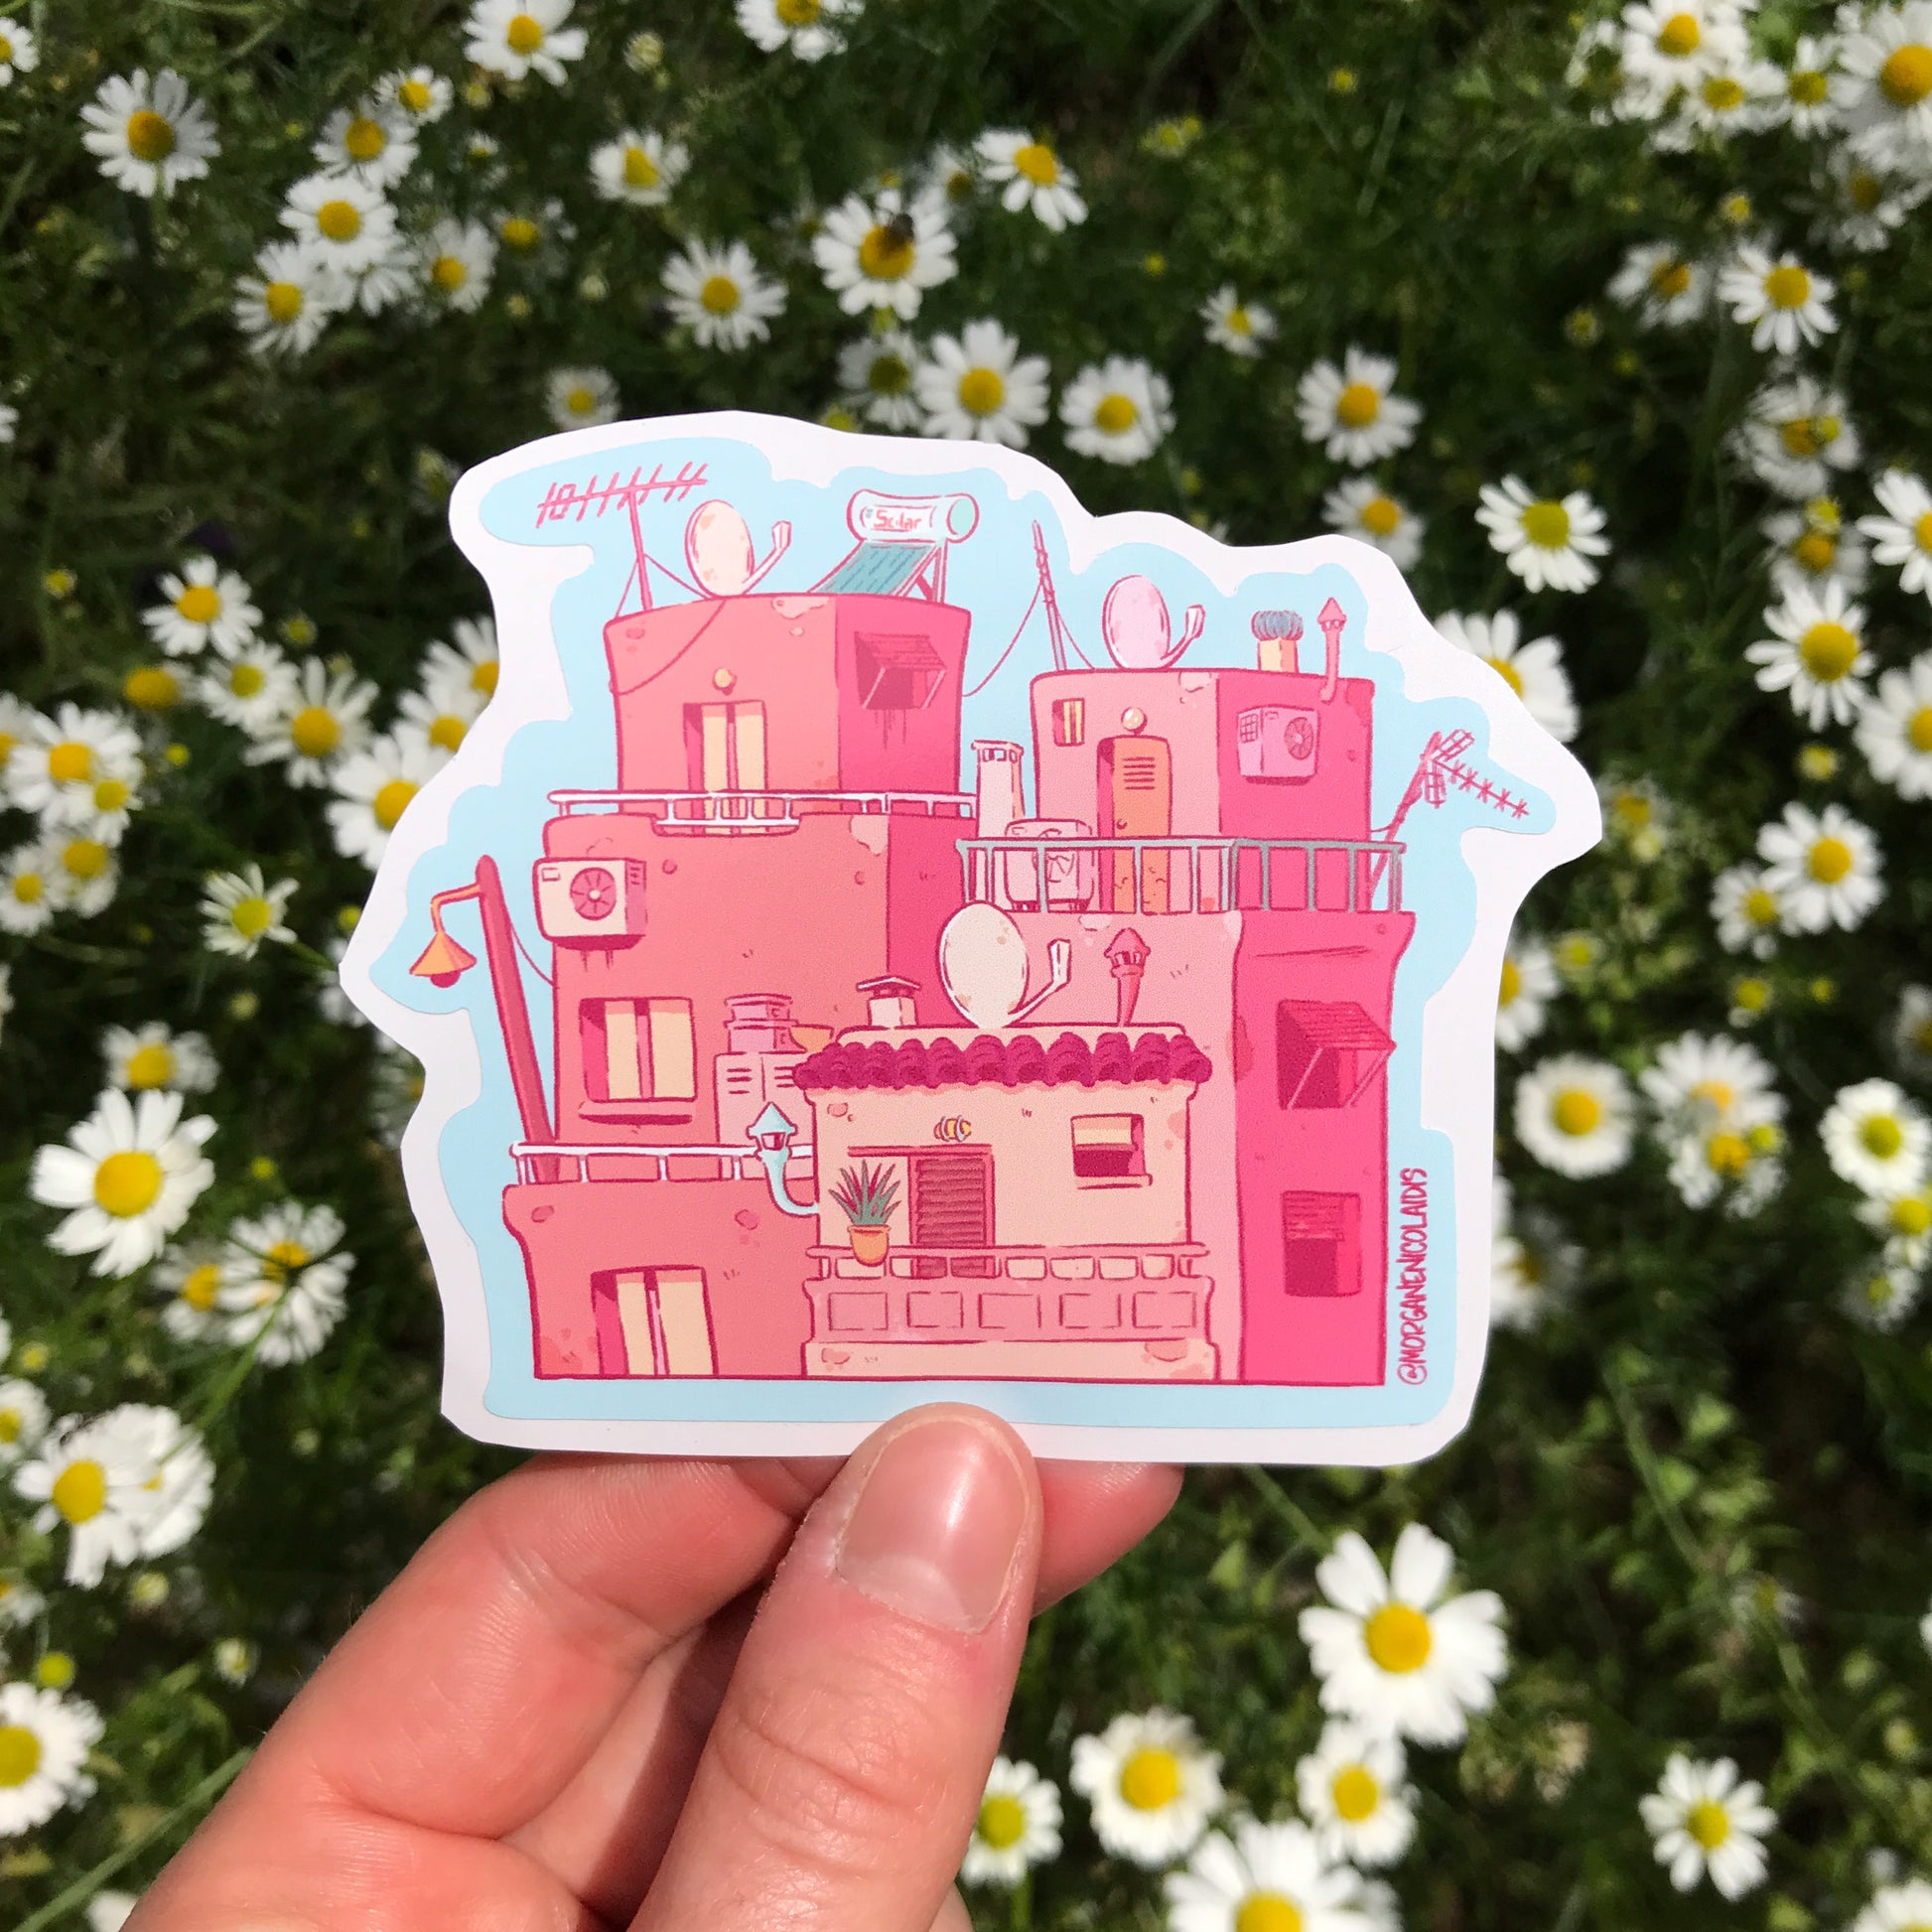 The sticker is hold by a hand. The background is a bed of marguerites.